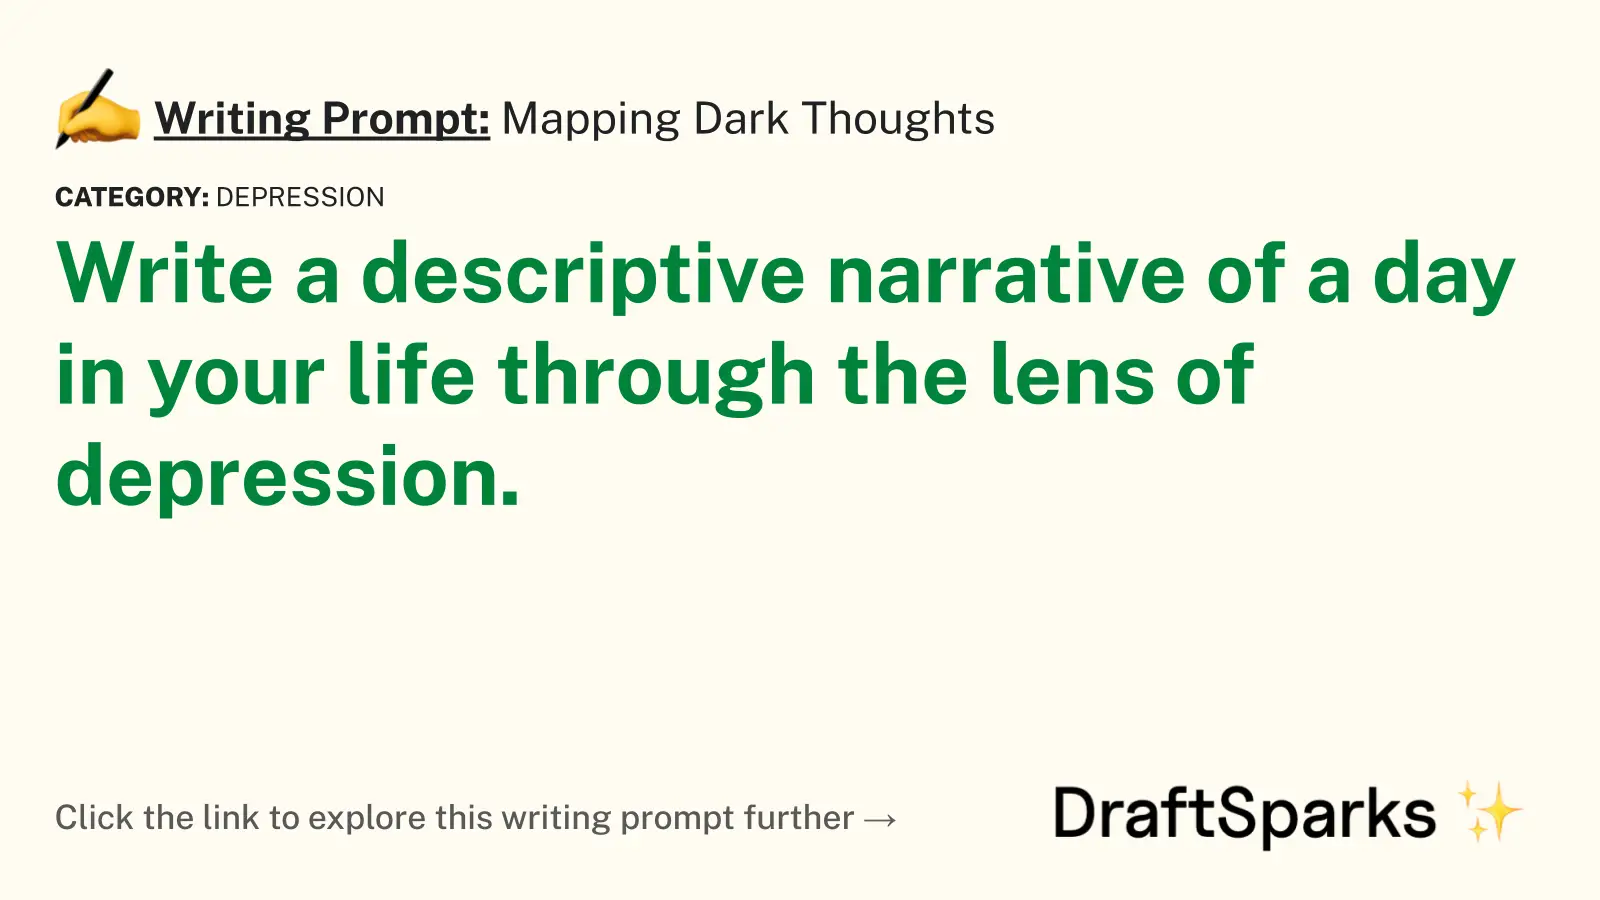 Mapping Dark Thoughts